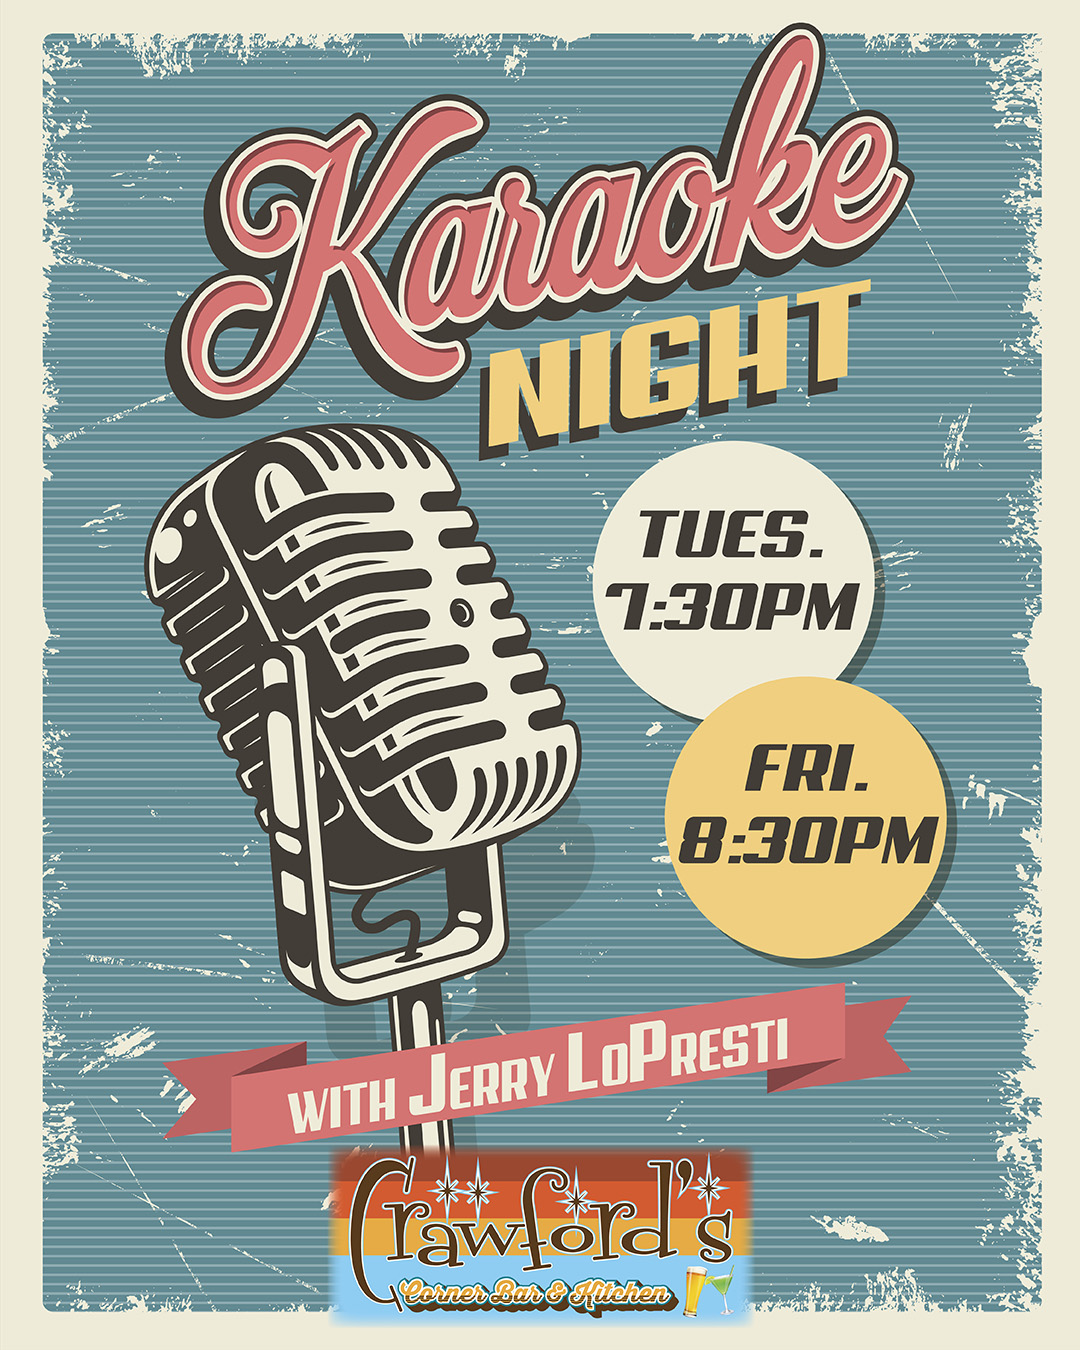 A poster for karaoke night with a microphone.